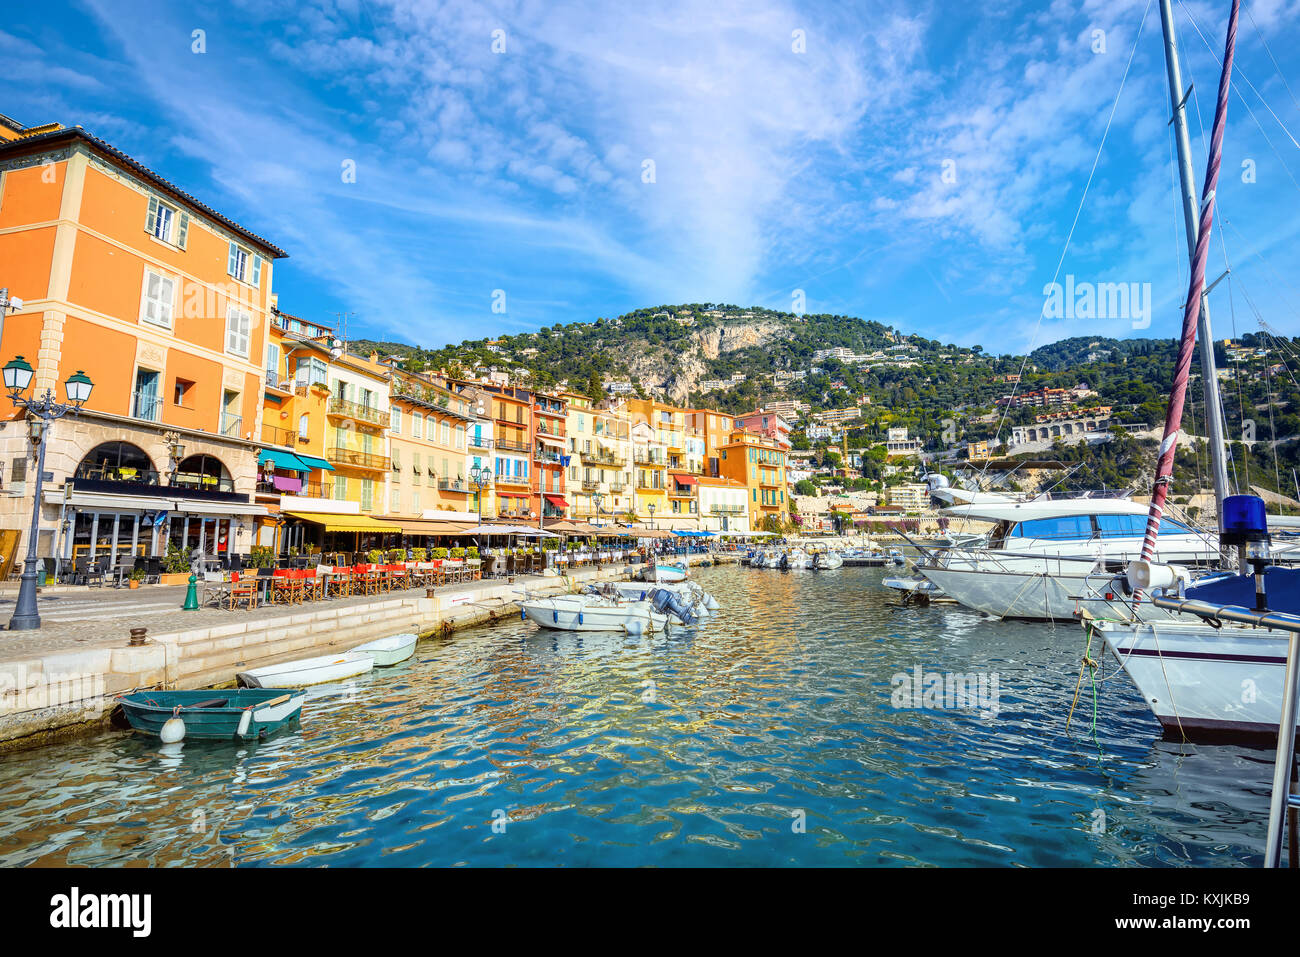 View of colorful houses on seafront in village of Villefranche-sur-Mer. Cote d'Azur, France Stock Photo